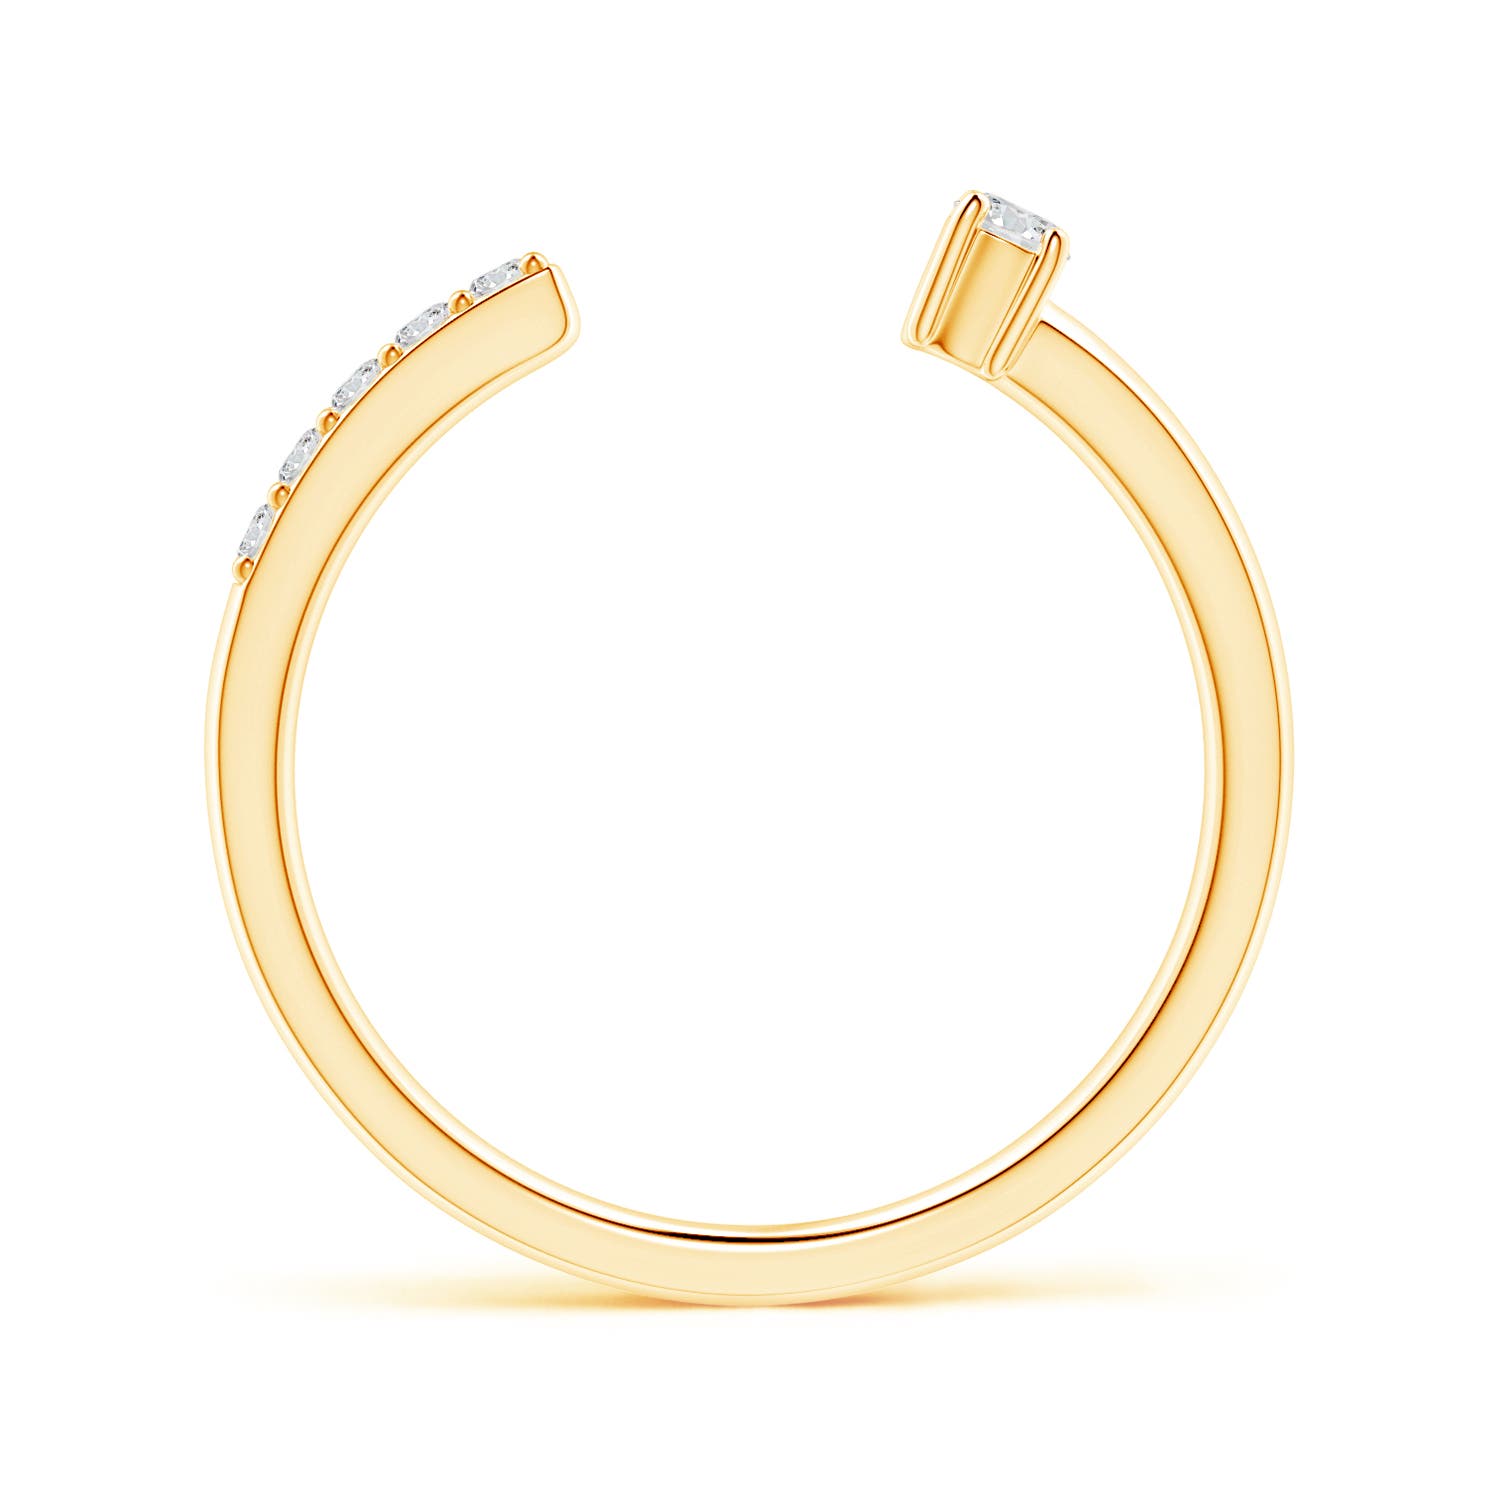 H, SI2 / 0.15 CT / 14 KT Yellow Gold